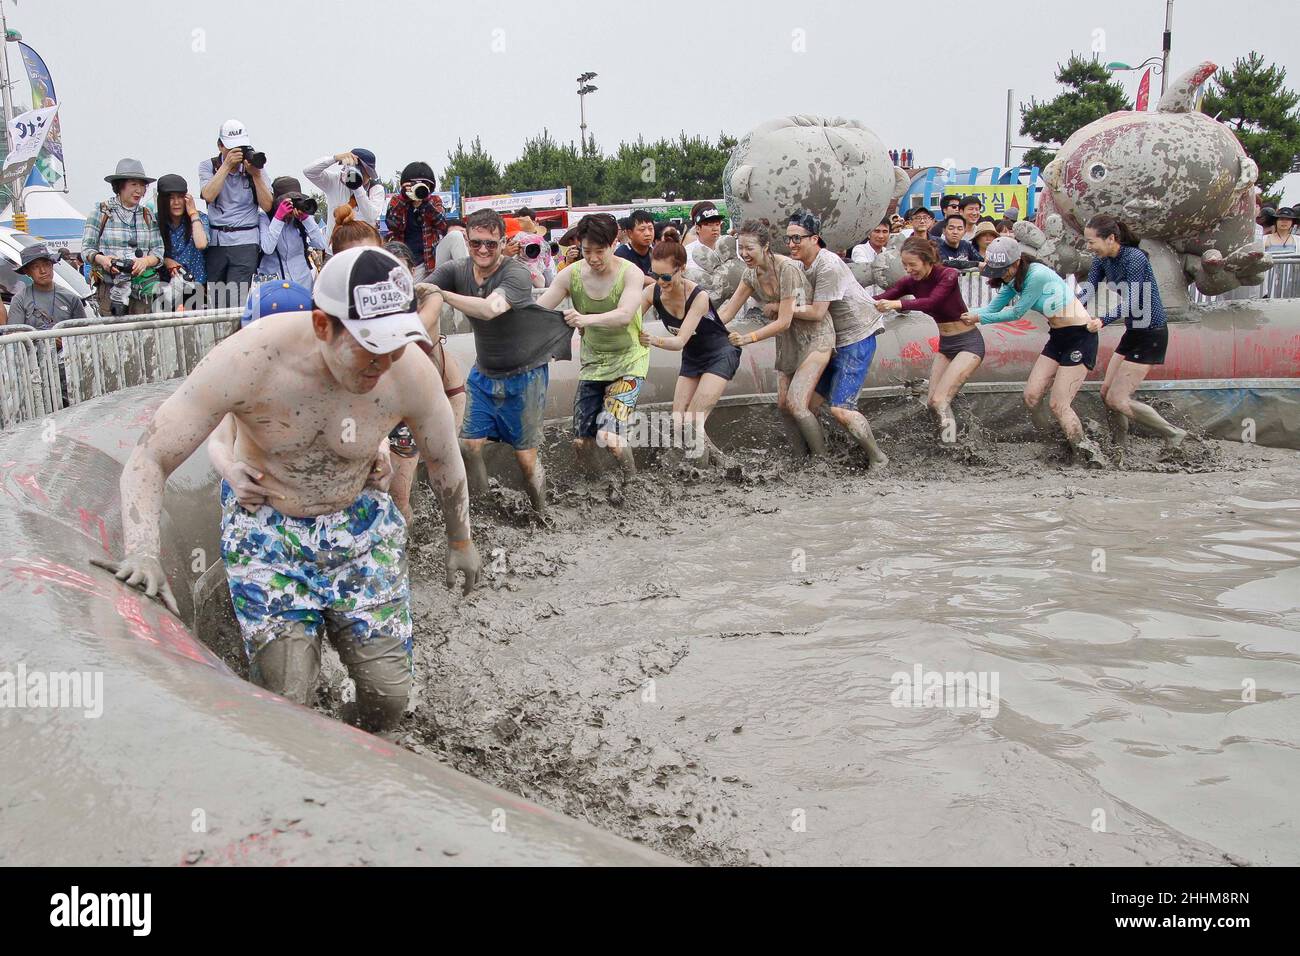 July 18, 2015 - South Korea, Boryeong : Visotors play in a mud pool during the Boryeong Mud Festival at Daecheon Beach in Boryeong , South Korea, The 18th annual mud festival features mud wrestling and mud sliding. Stock Photo